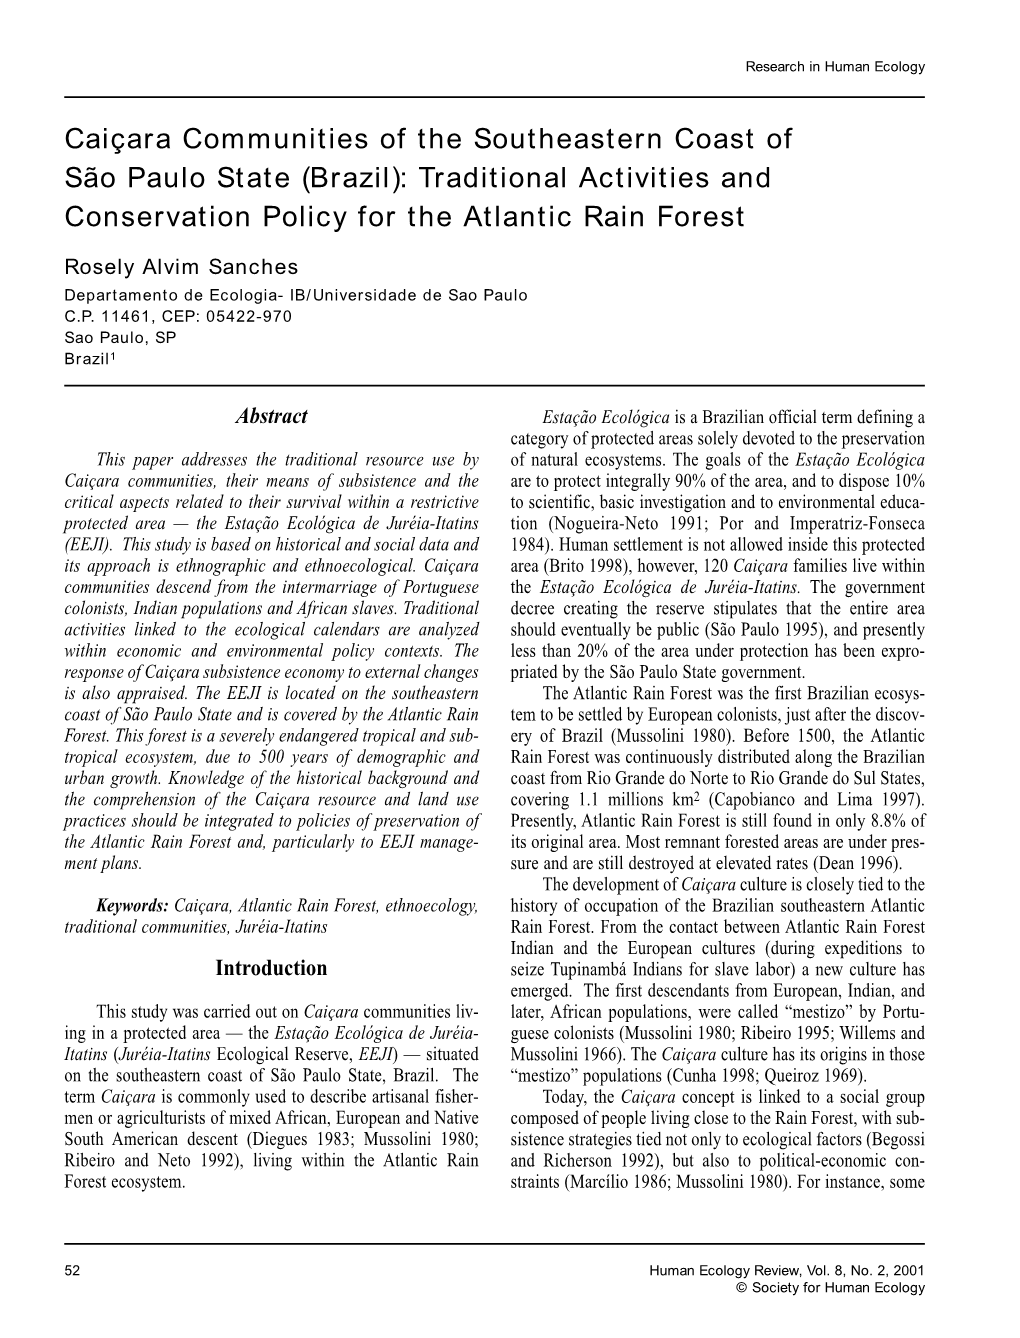 Brazil): Traditional Activities and Conservation Policy for the Atlantic Rain Forest